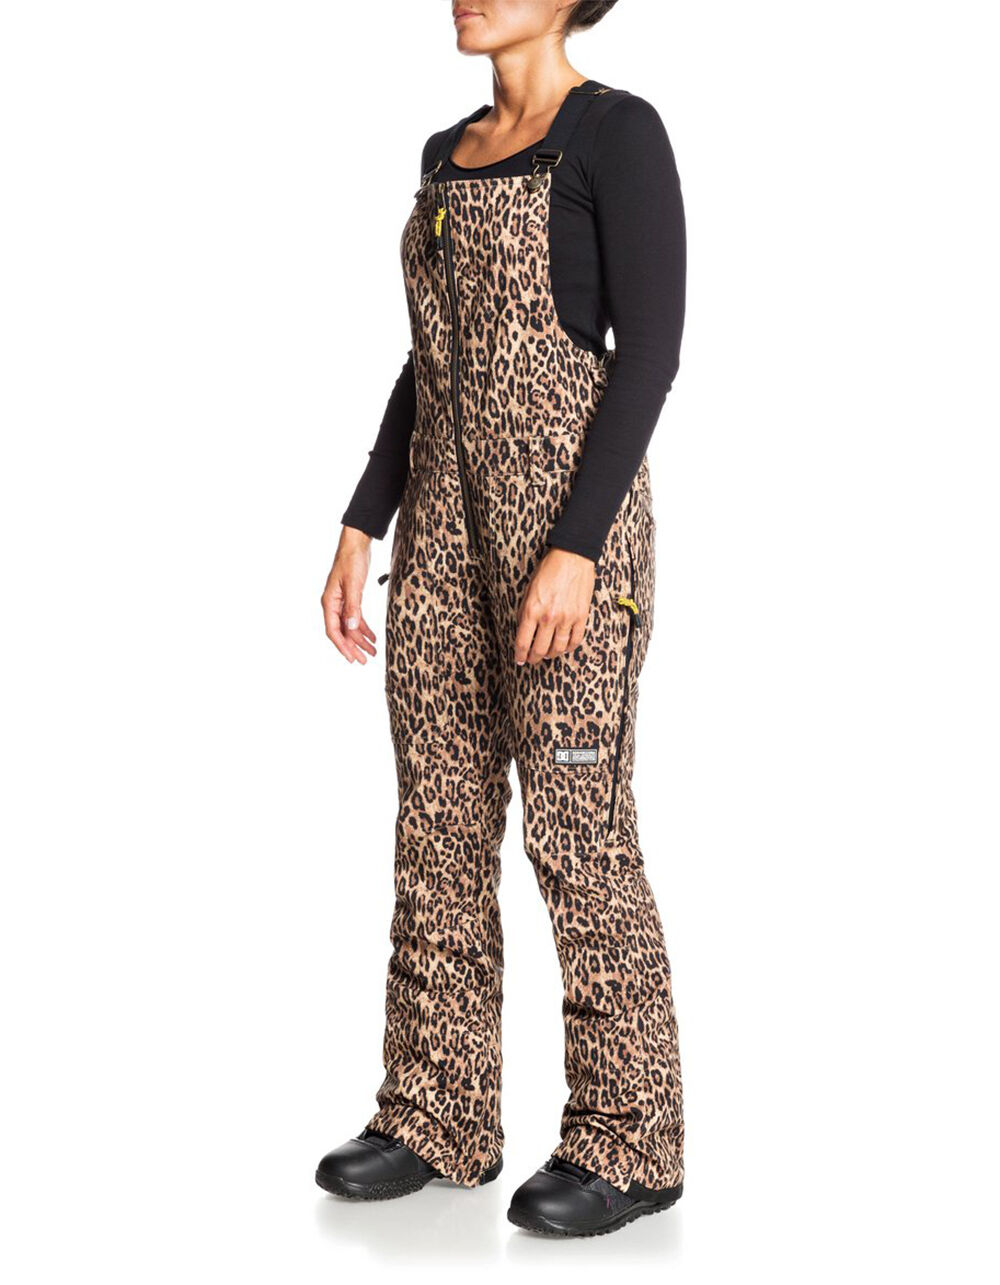 DC SHOES Collective Womens Softshell Snow Bib Pants - LEOPARD | Tillys